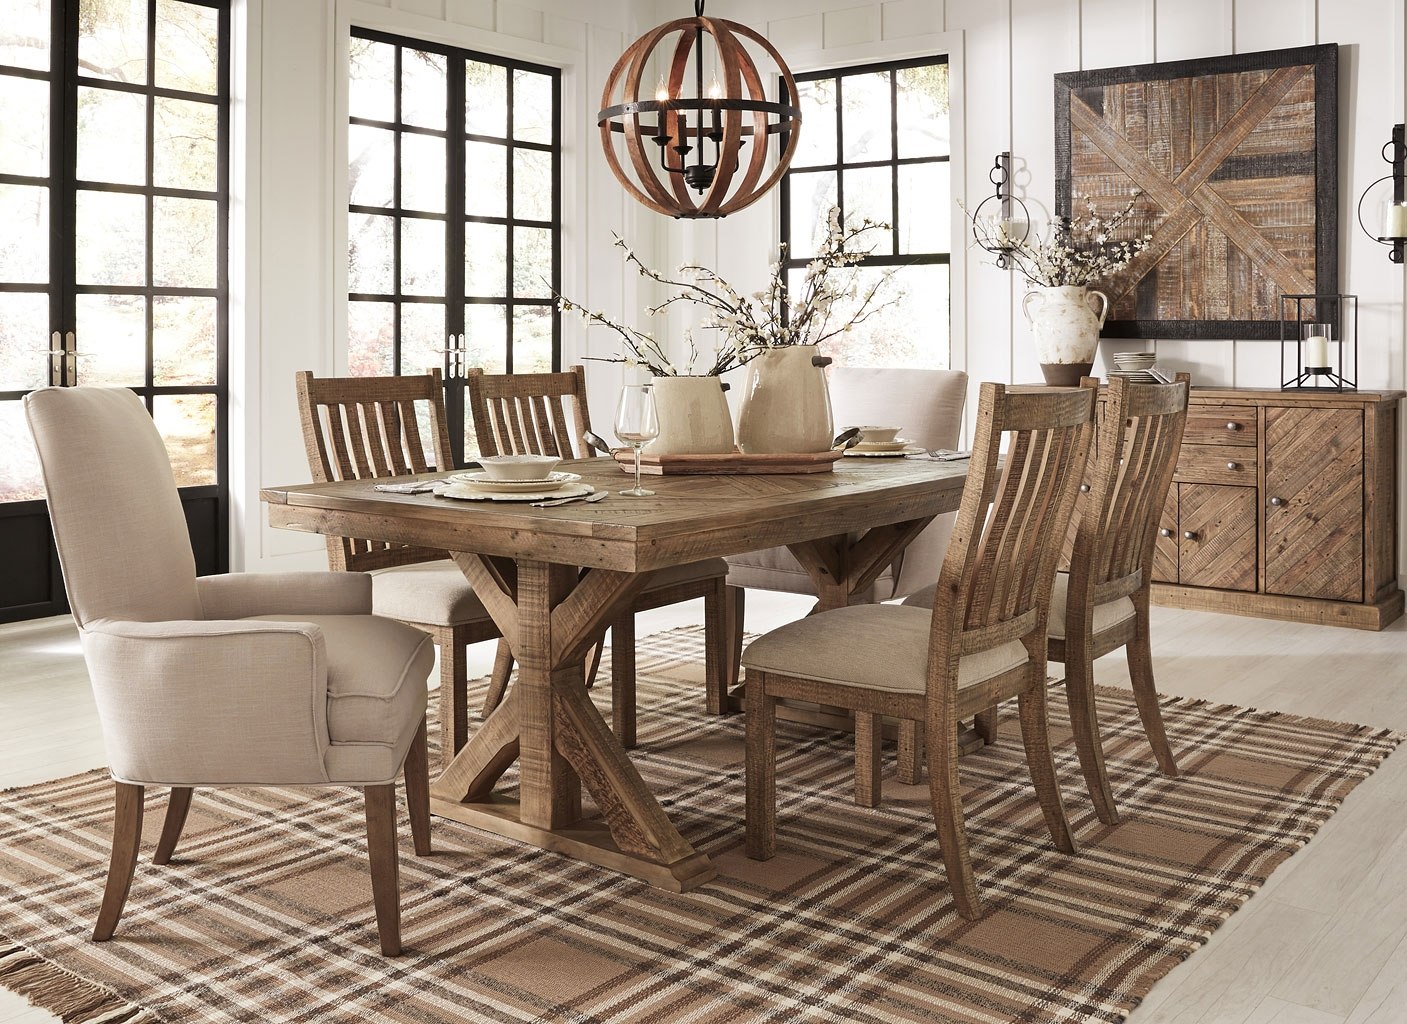 grindleburg dining room table chairs